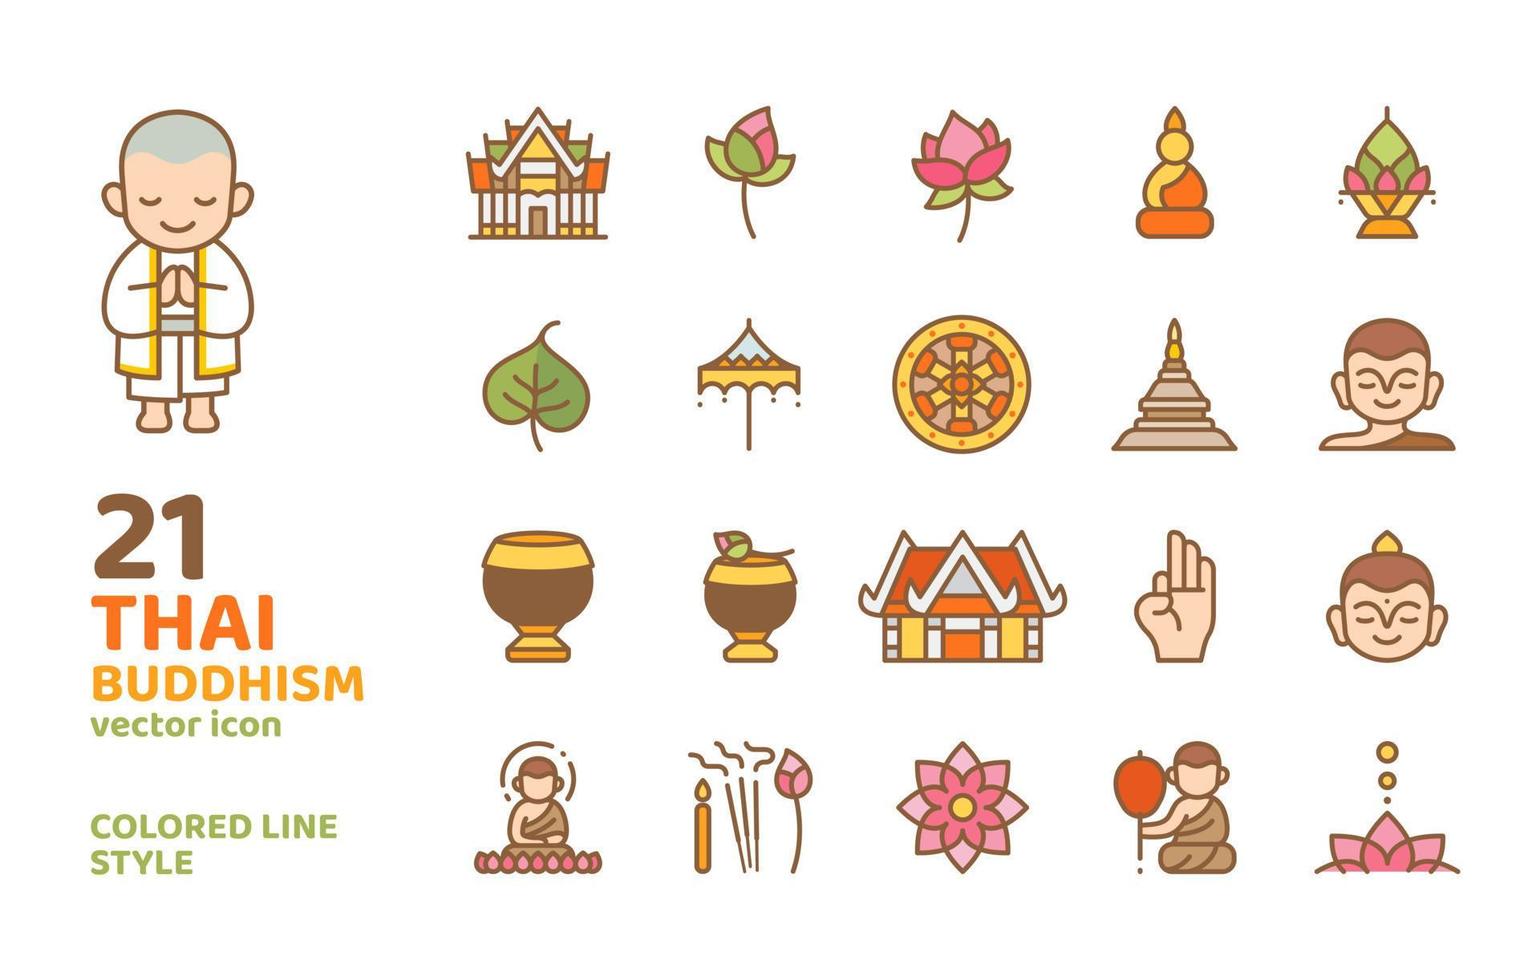 thai buddhism colored line icon style vector illustration